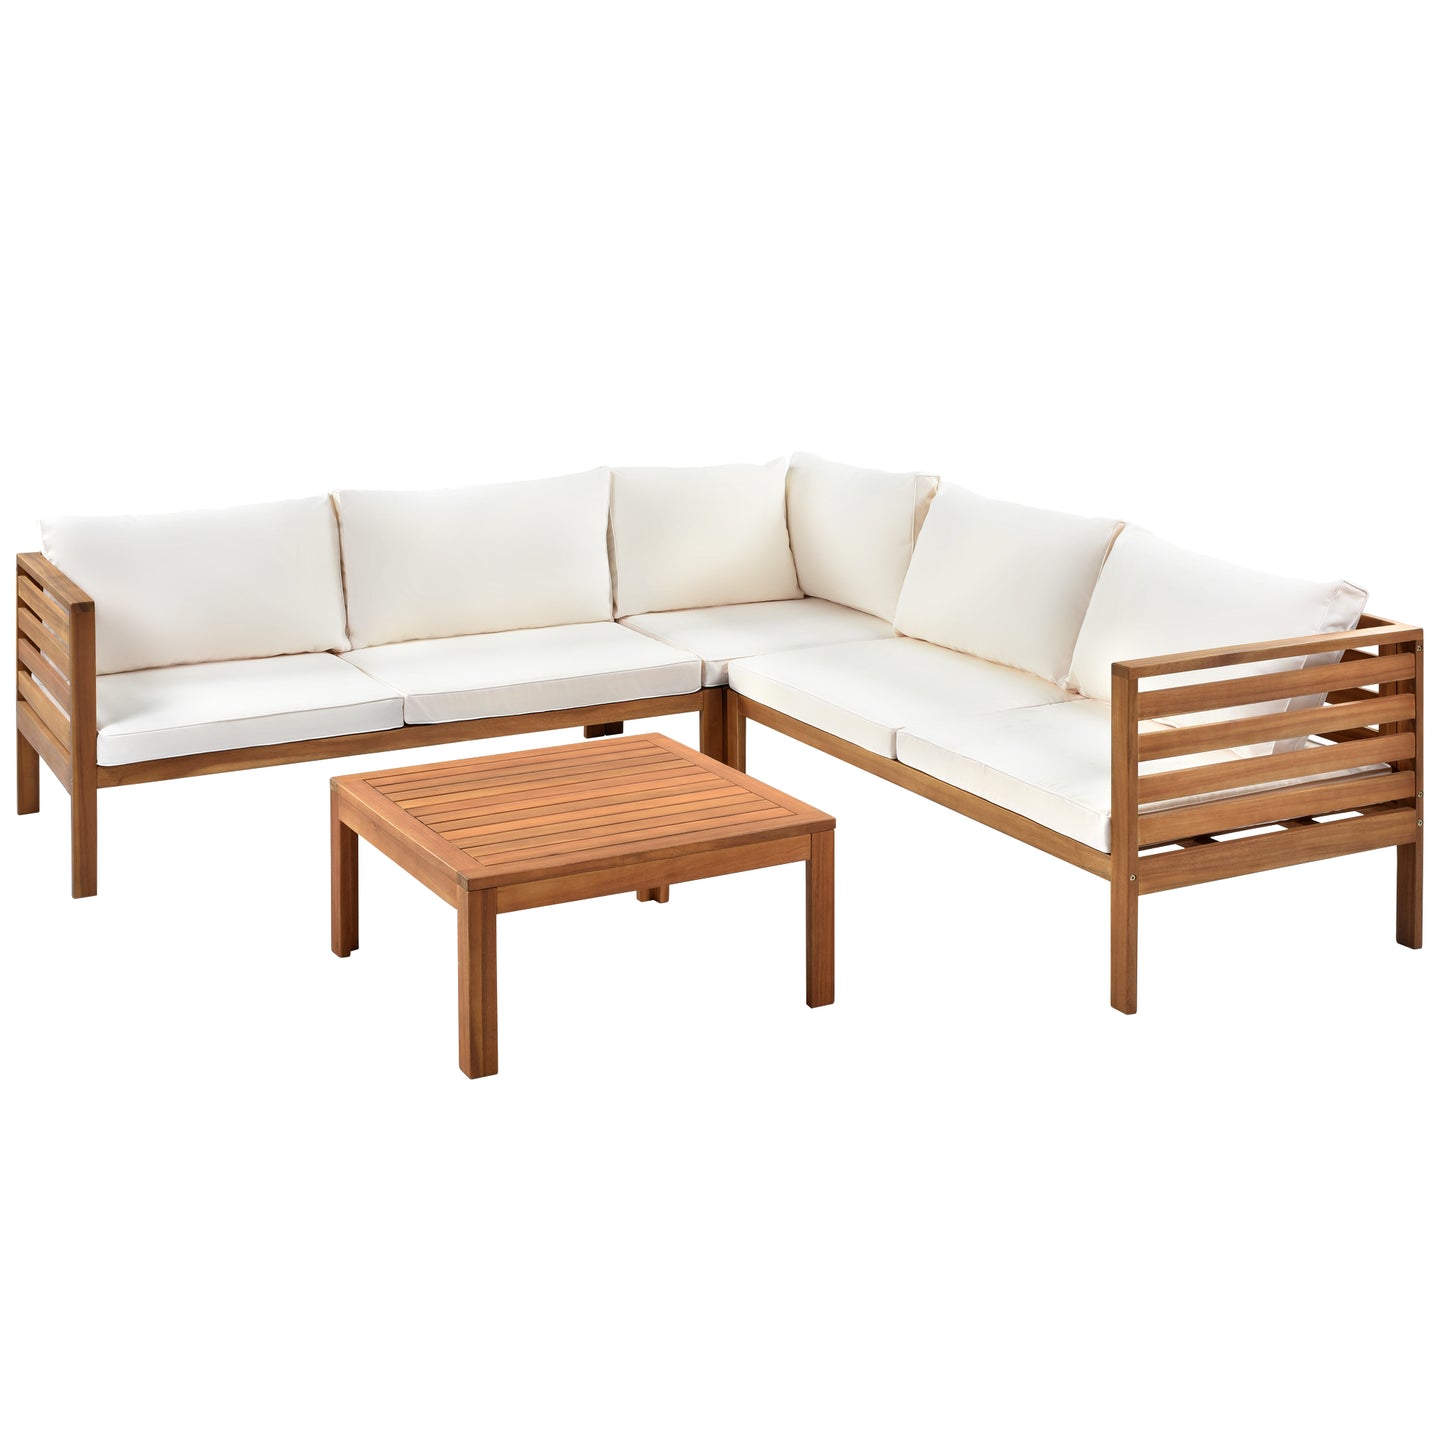 SYNGAR 4 Piece Wood Patio Furniture Set, Outdoor Seating Chat Set with Beige Cushions, Sectional Conversation Sofa Chairs Set with Coffee Table, for Balcony, Backyard, Poolside, Deck, Garden, D7488